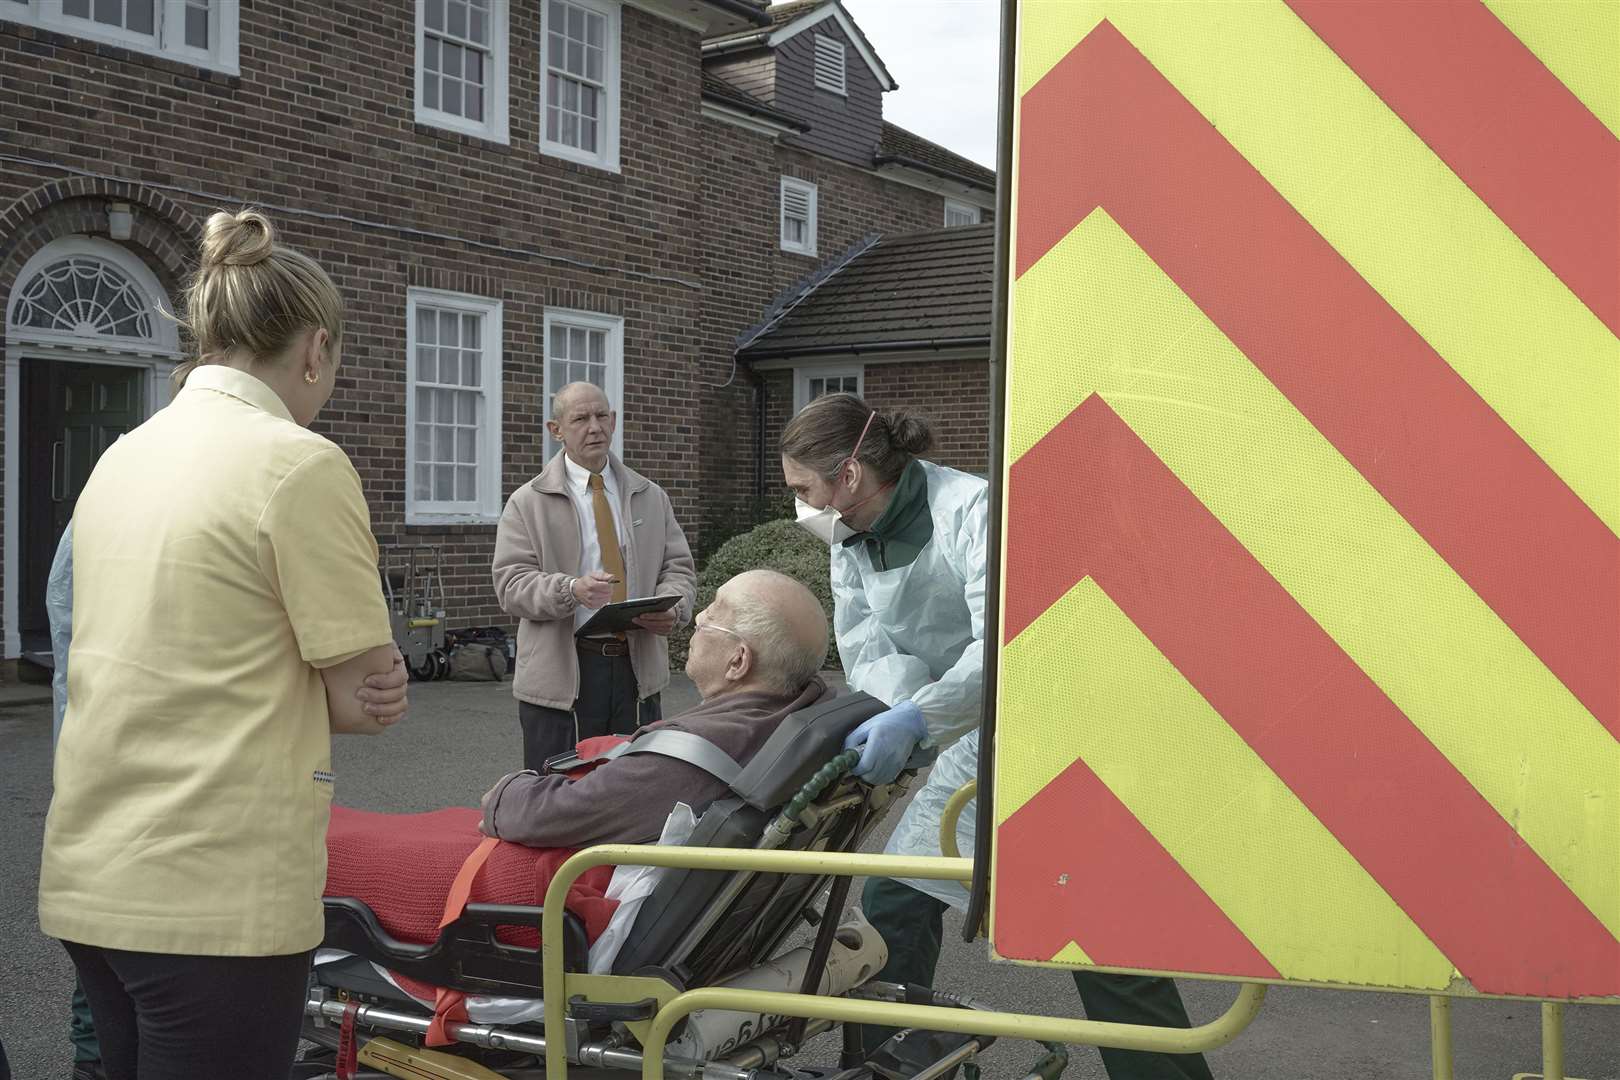 In the drama, more residents are sent to the care home to free up hospital beds. Photo: Channel 4